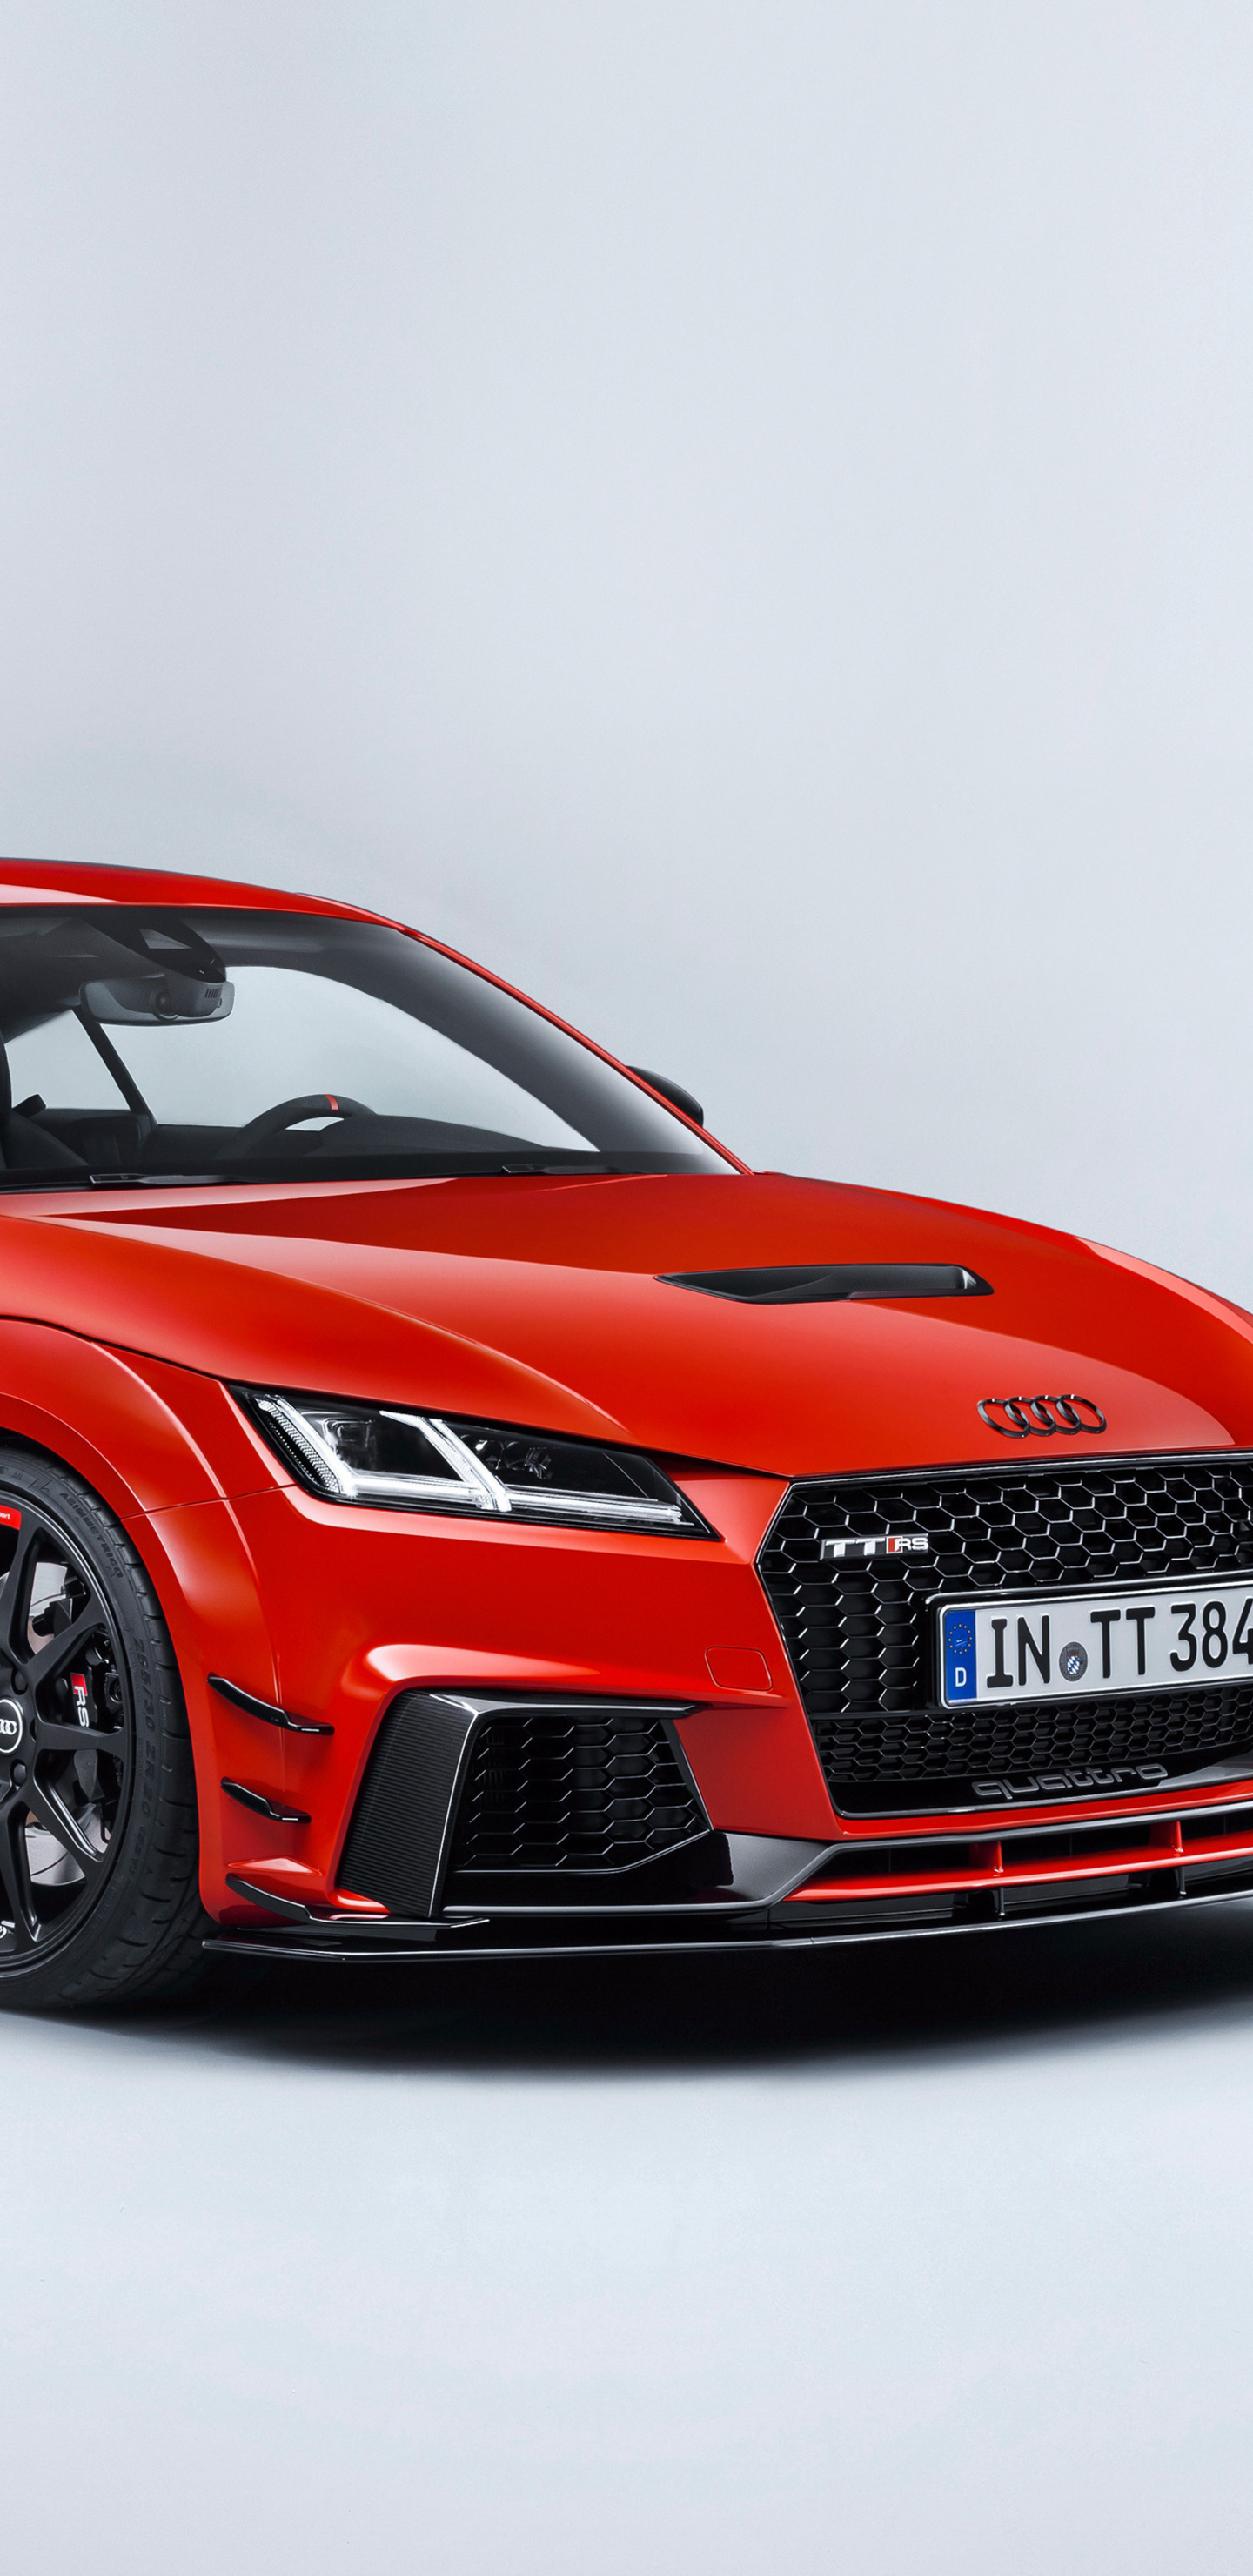 Download Audi Tt wallpapers for mobile phone free Audi Tt HD pictures